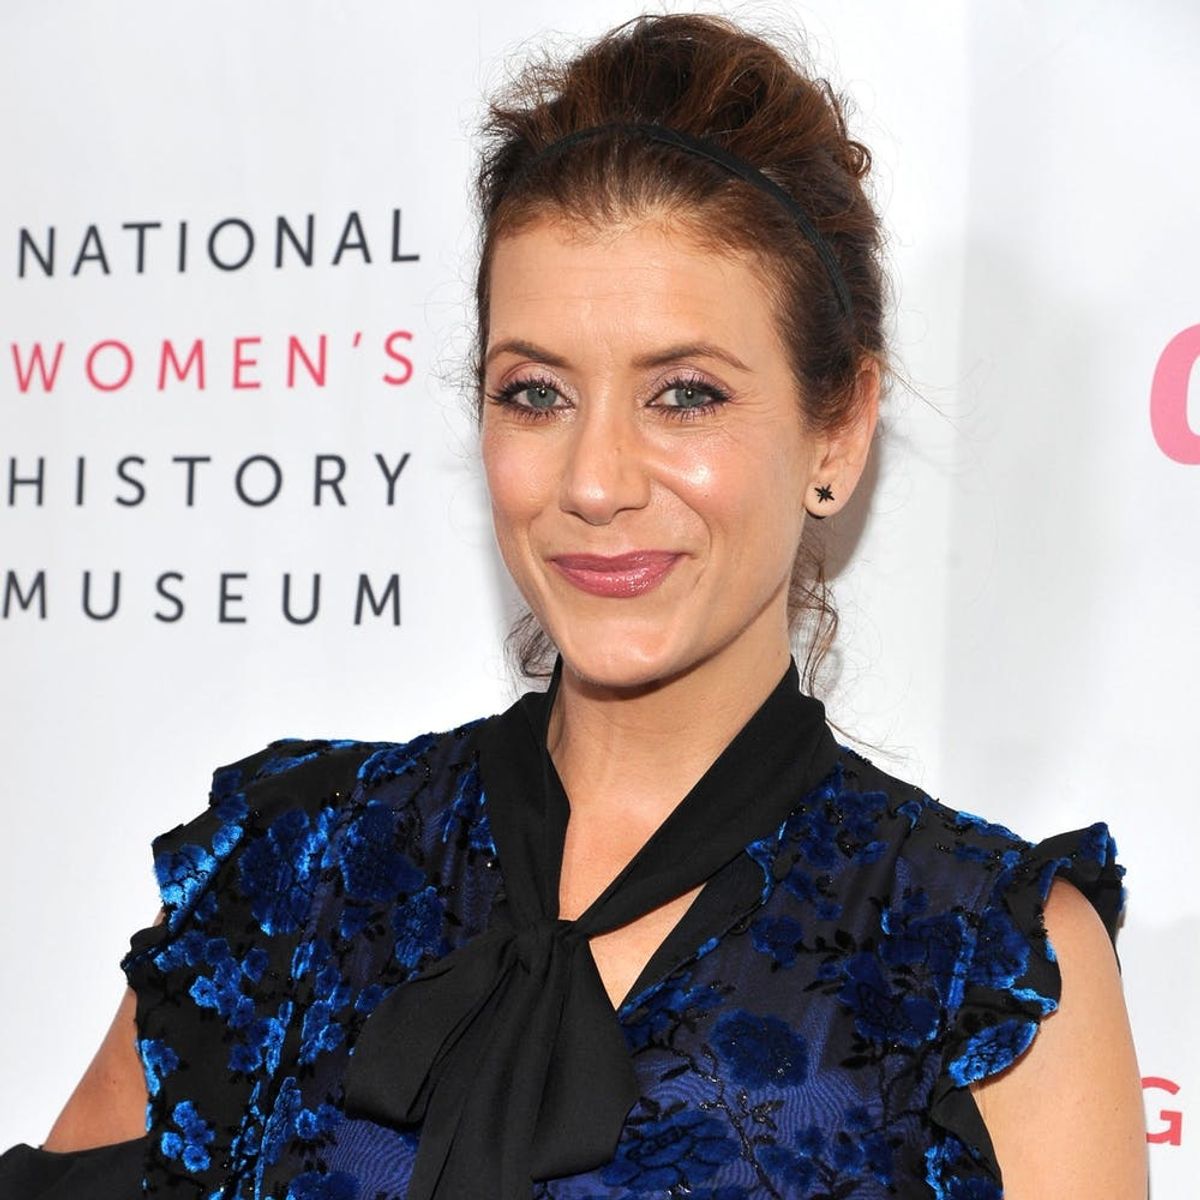 Grey’s Anatomy’s Kate Walsh Reveals She Was Diagnosed With a Brain Tumor 2 Years Ago